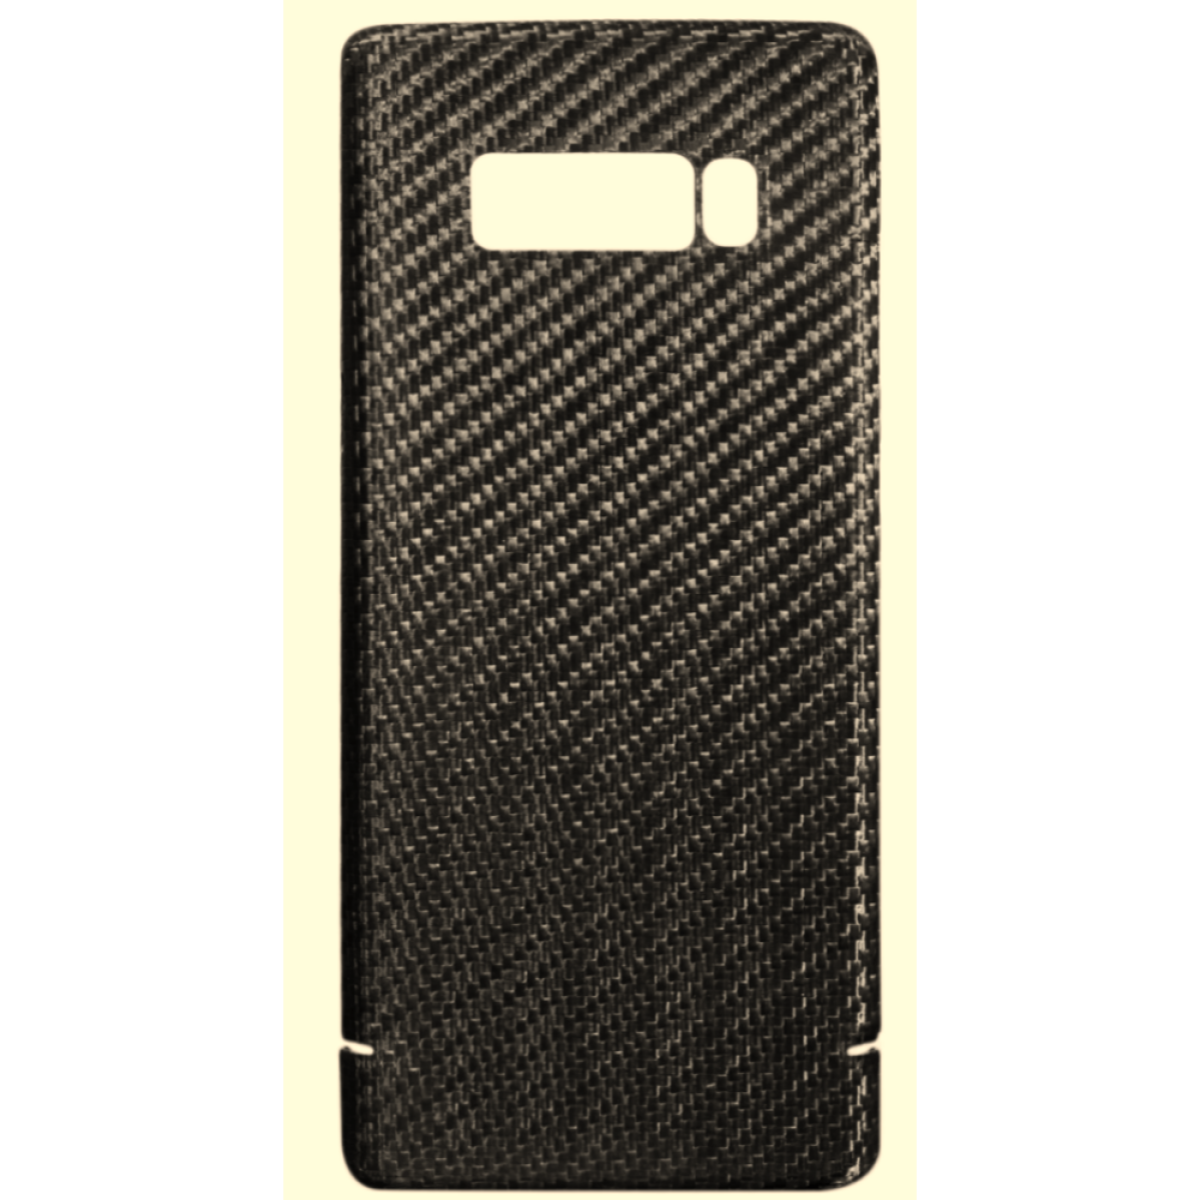 Viversis Carbon Cover 8, Cover, Universal, Full Note Universal, Not available